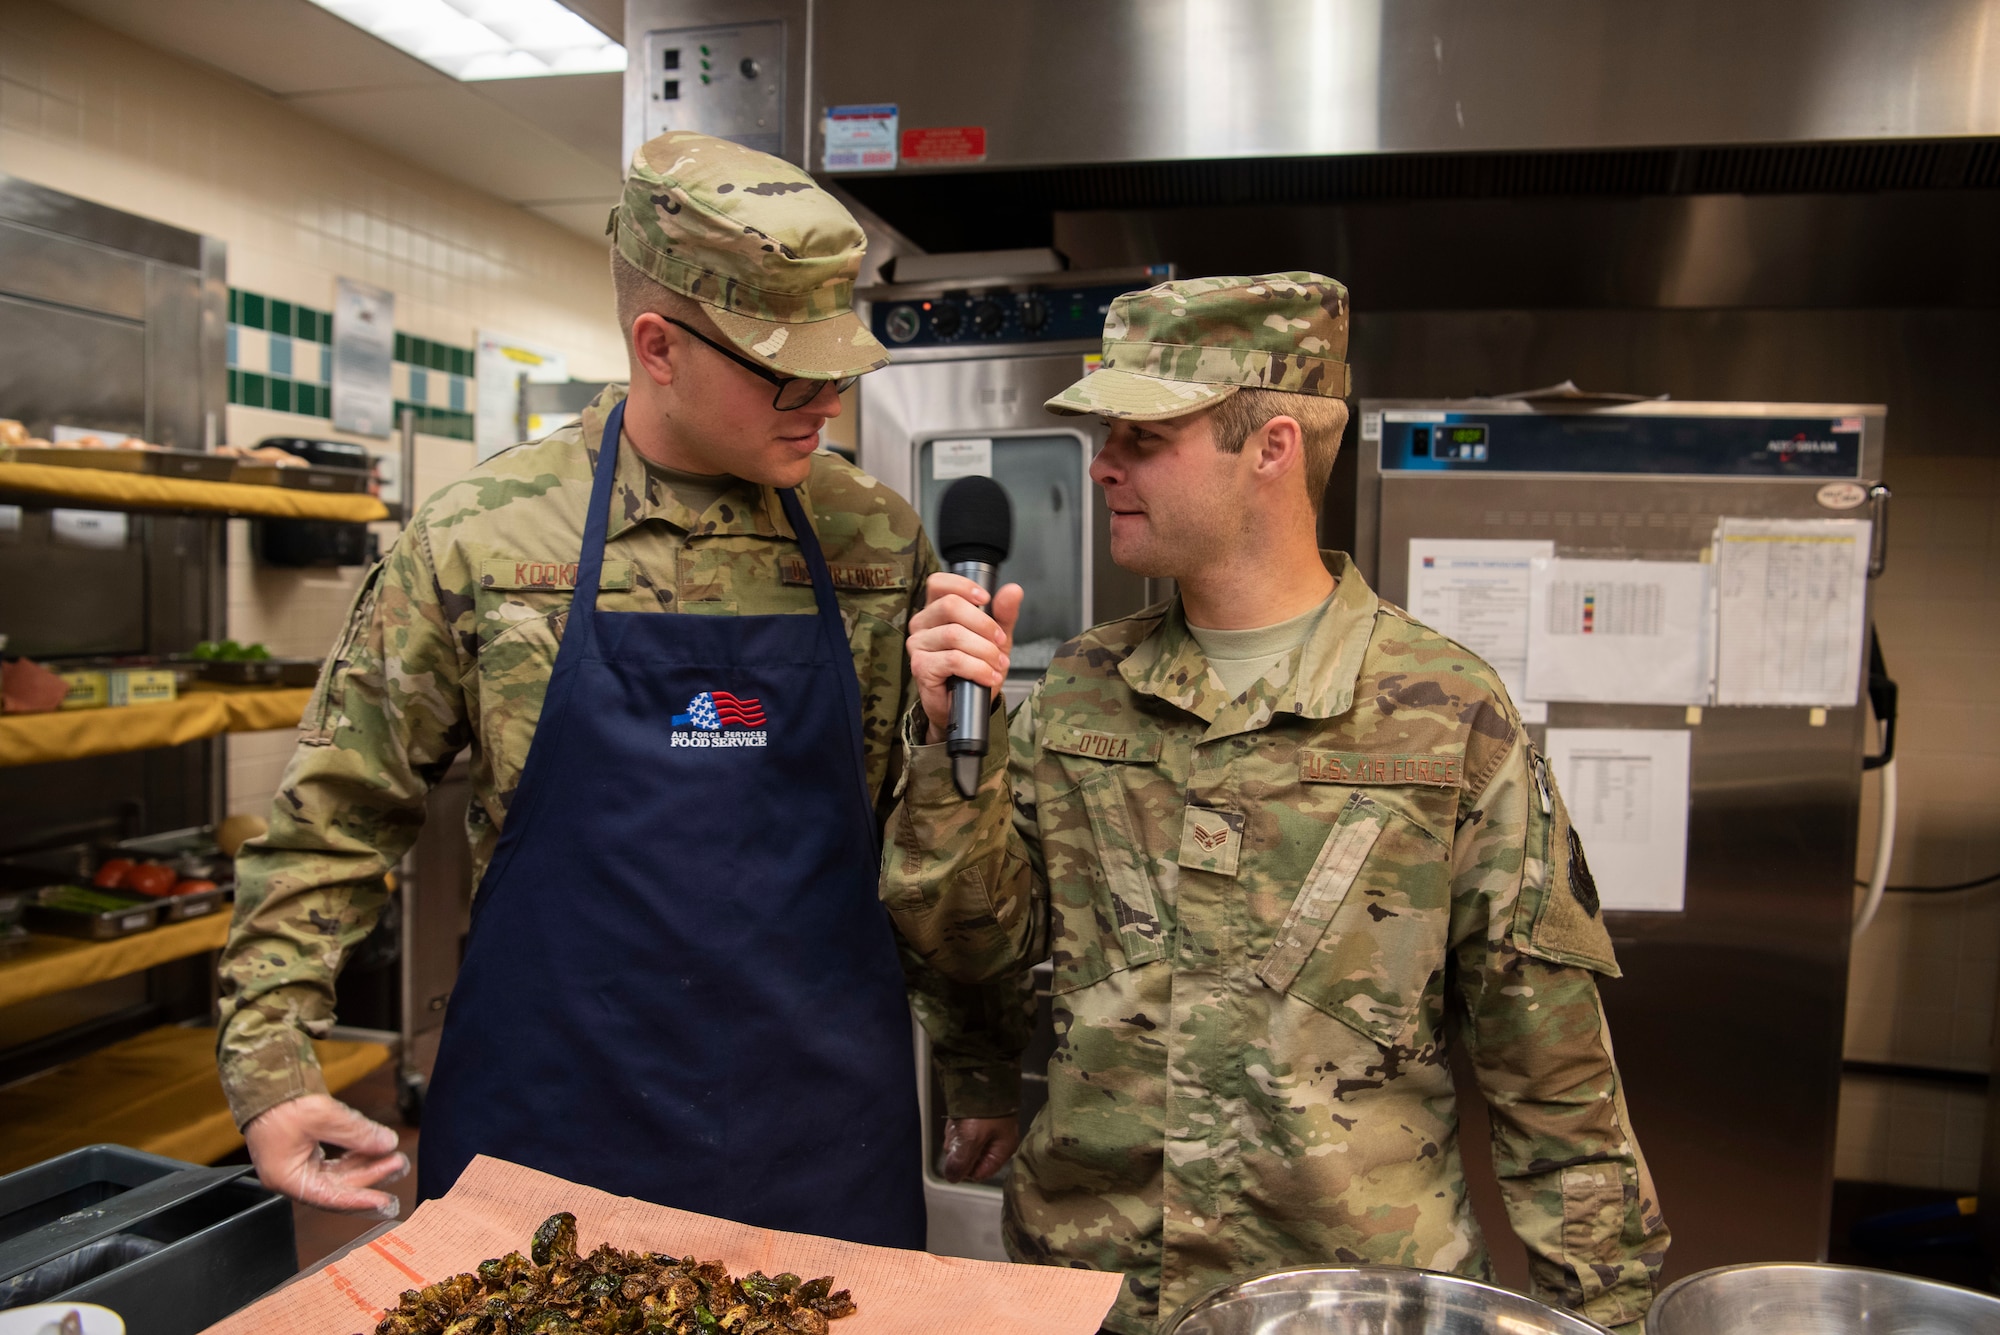 Senior Airman Kyle O’dea, 90th Force Support Squadron missile chef, interviews Airman 1st Class Nathaniel Kooker, 90th FSS food service specialist, about the items he has been preparing during a cooking competition Oct. 15, 2019, at F.E. Warren Air Force Base, Wyo. O’dea was one of the hosts during the competition and provided commentary for the living feed into the dining hall where the judges and fans sat. (U.S. Air Force photo by Senior Airman Abbigayle Williams)